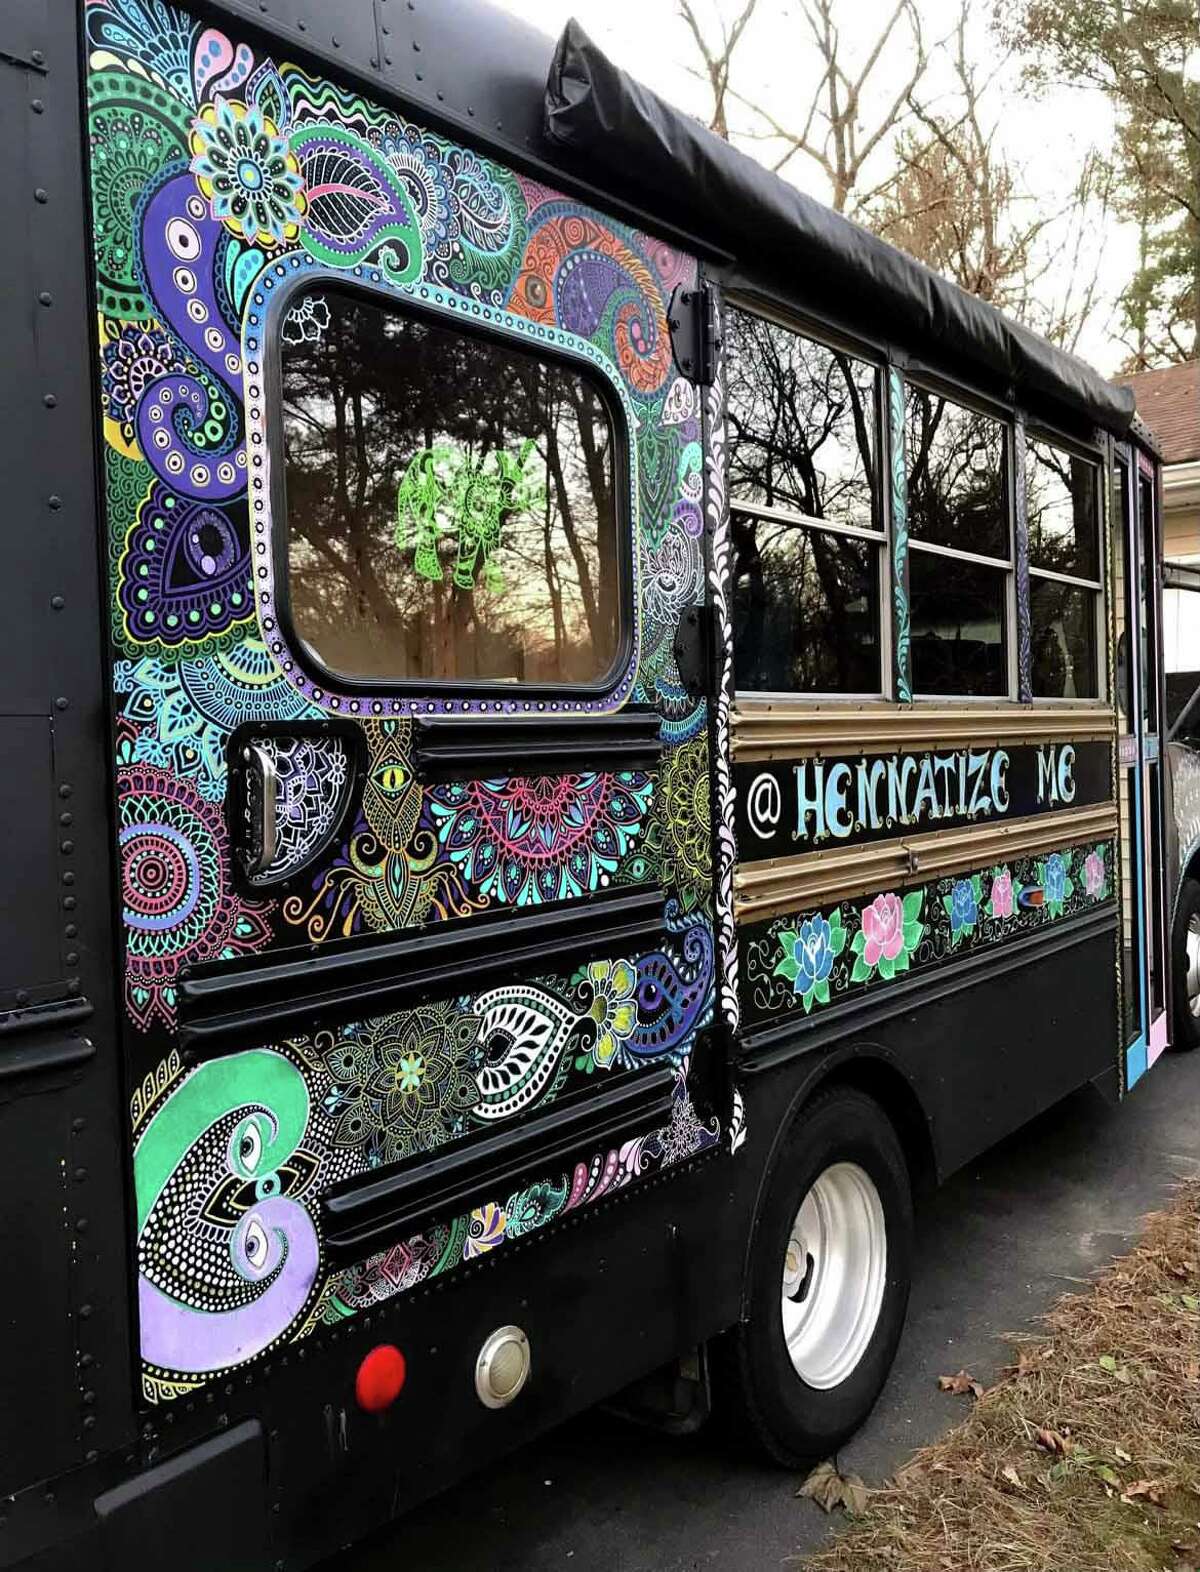 The Hennative henna bus will be at the Doors Festival at Avant Garde in Branford on Sunday, Aug. 14.